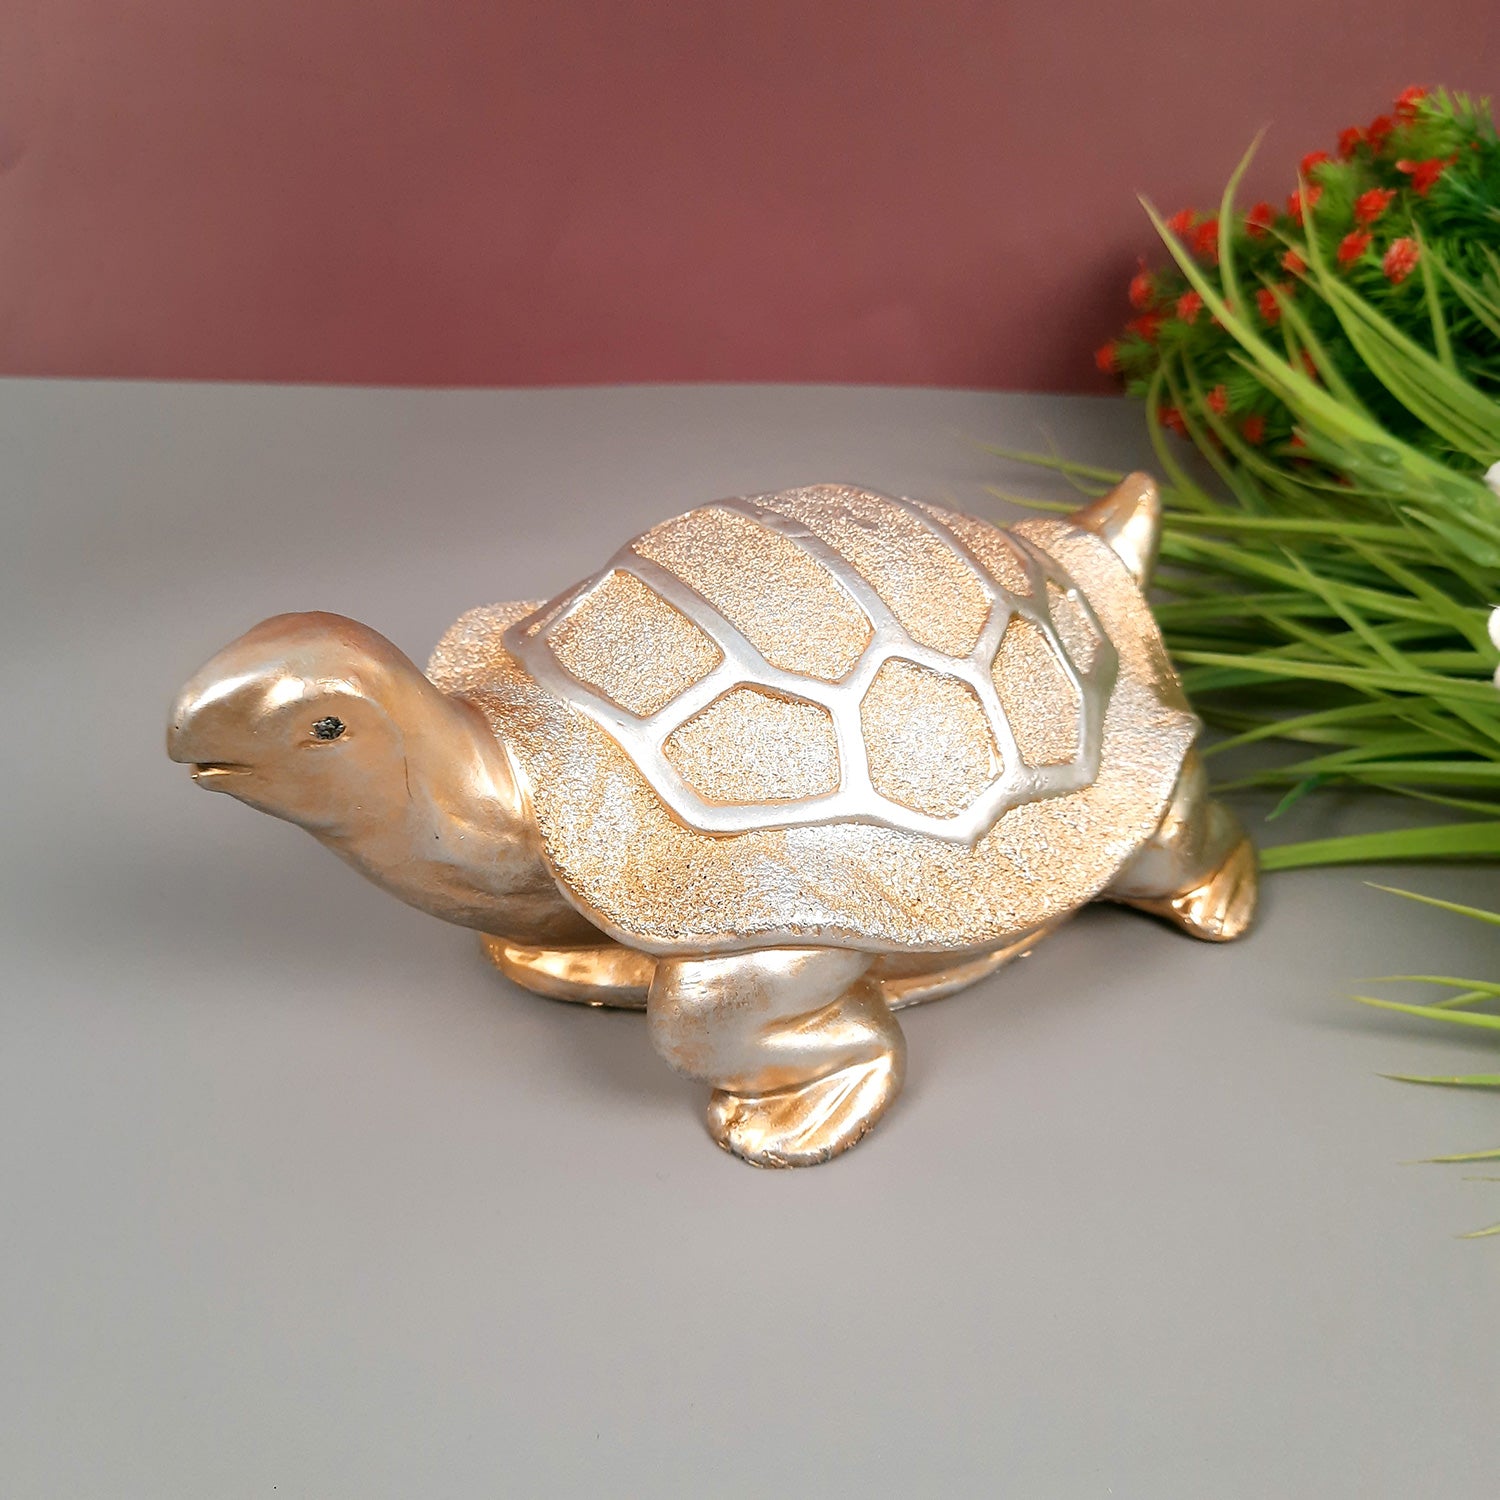 Feng Shui Tortoise Showpiece Set for Good Luck | Turtle Figurines for Good Luck & Positive Energy - For Home Decor, Living Room, Office & Gift Success - Apkamart #Style_Style 2